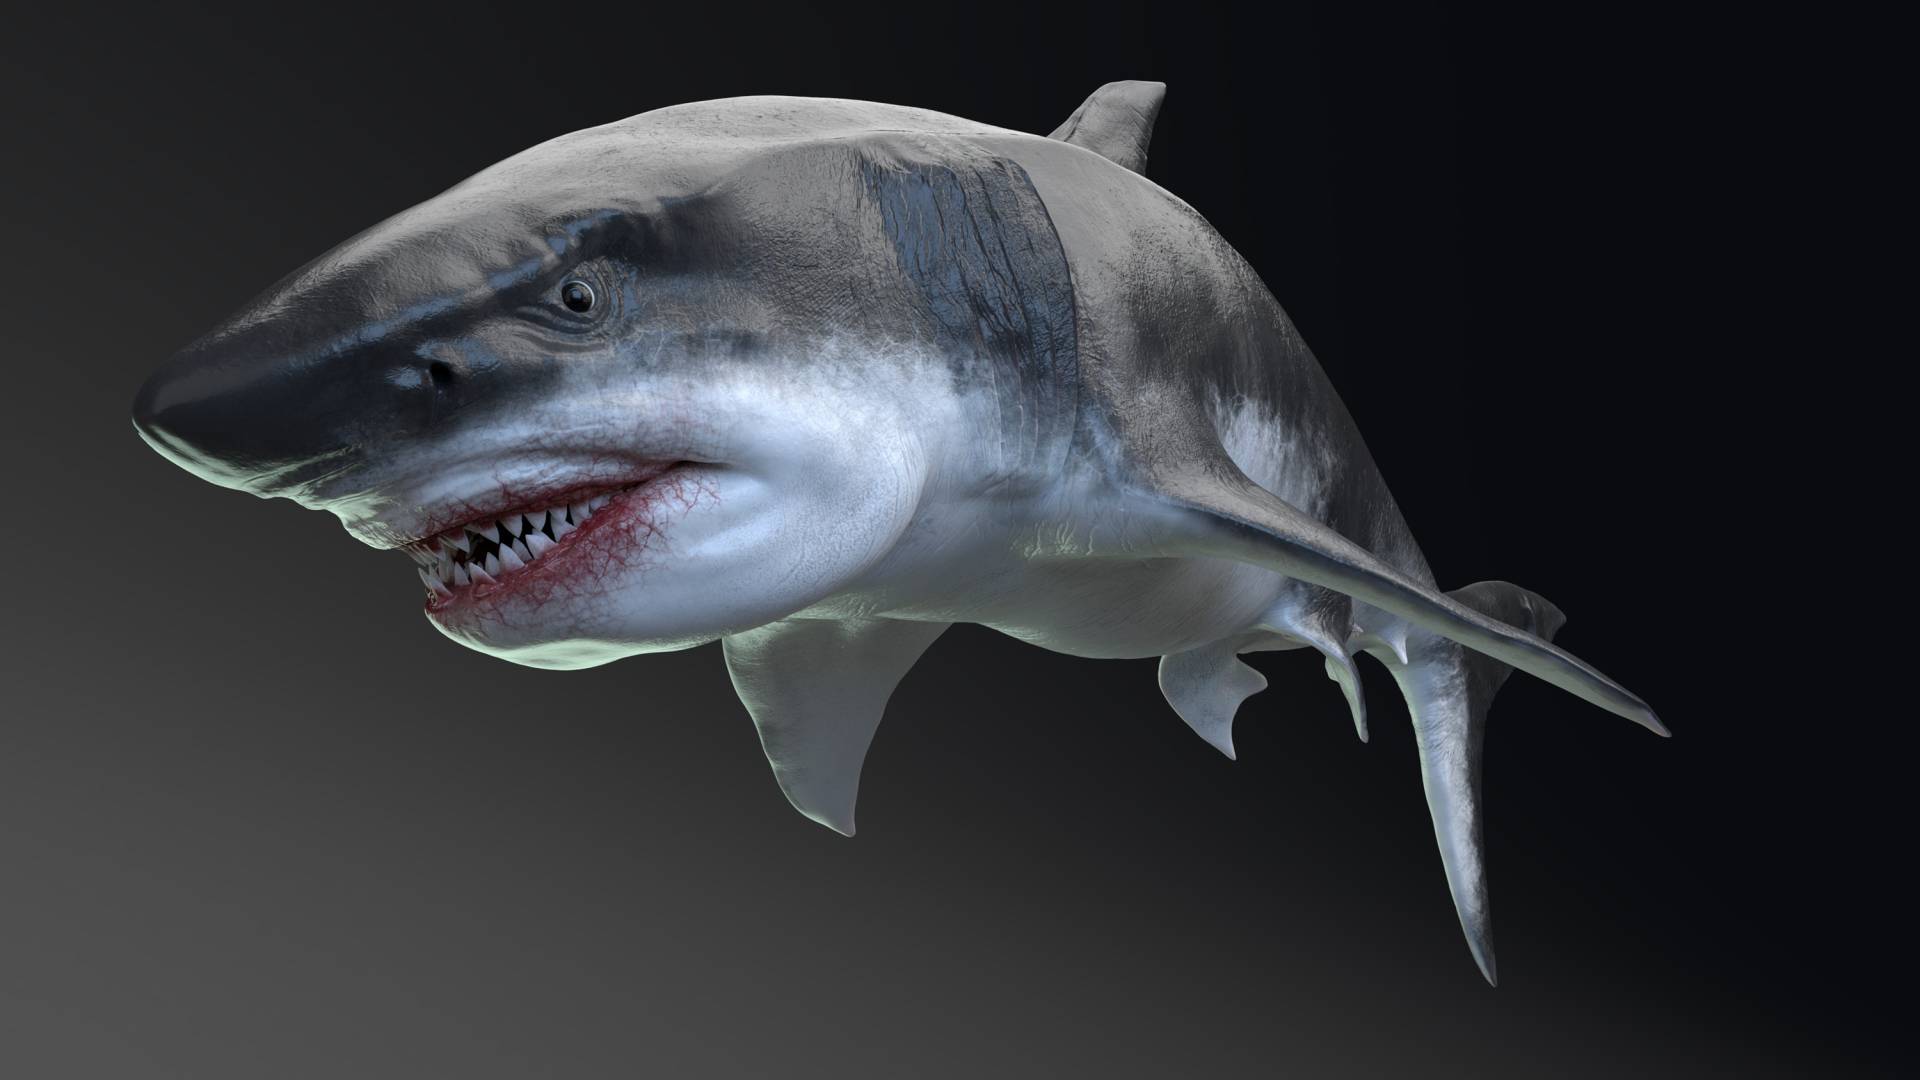 Tooth analysis confirms the megalodon - a huge ancient shark - was